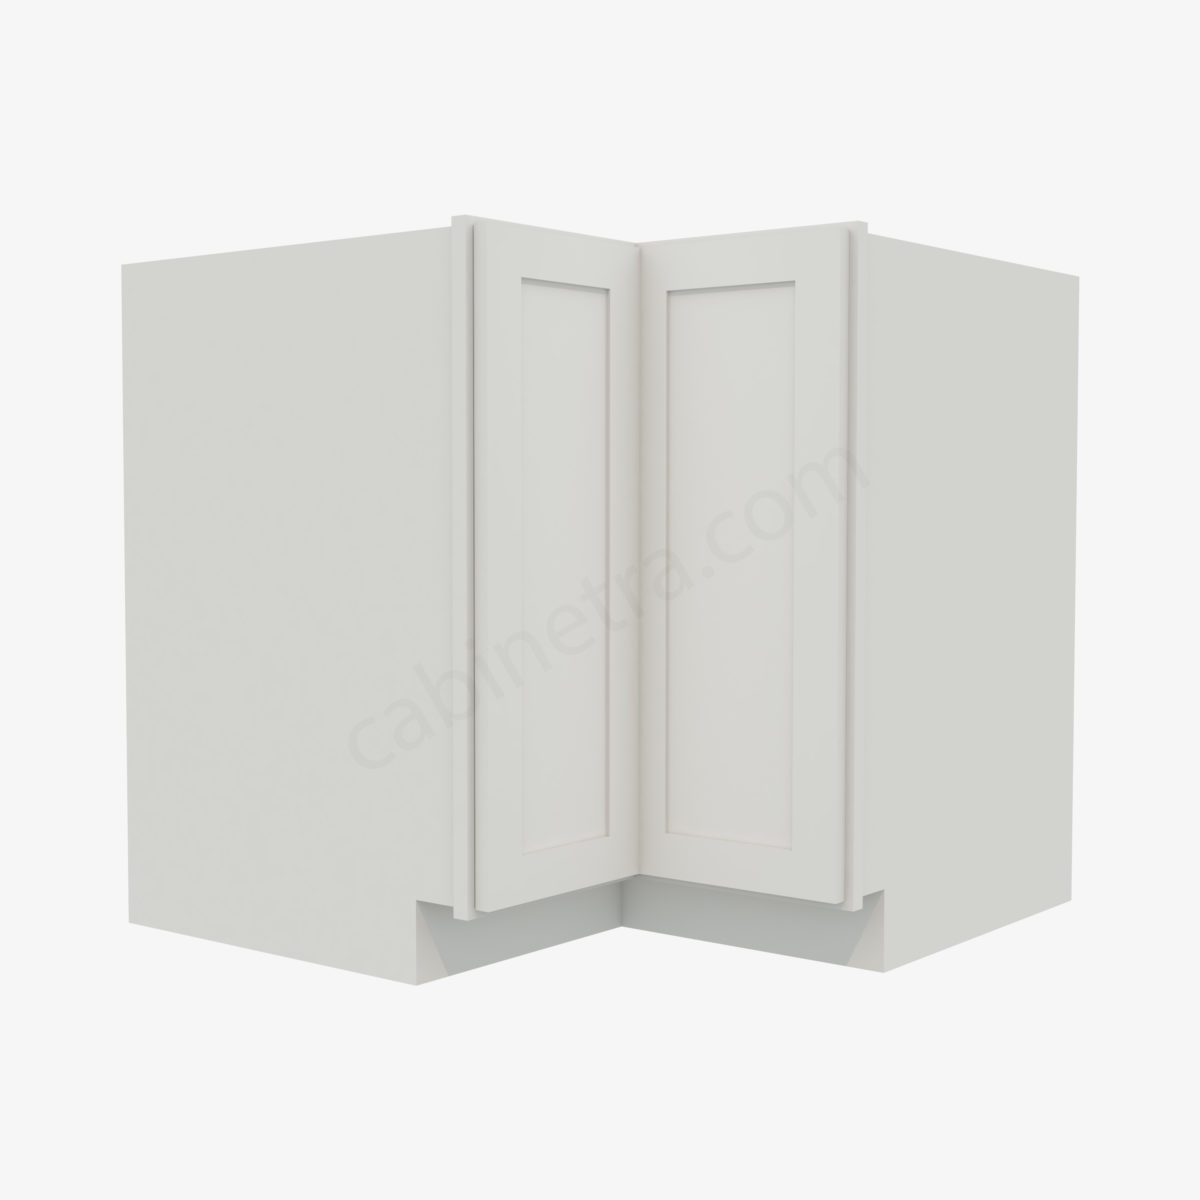 AW LS3612S 3 Forevermark Ice White Shaker Cabinetra scaled